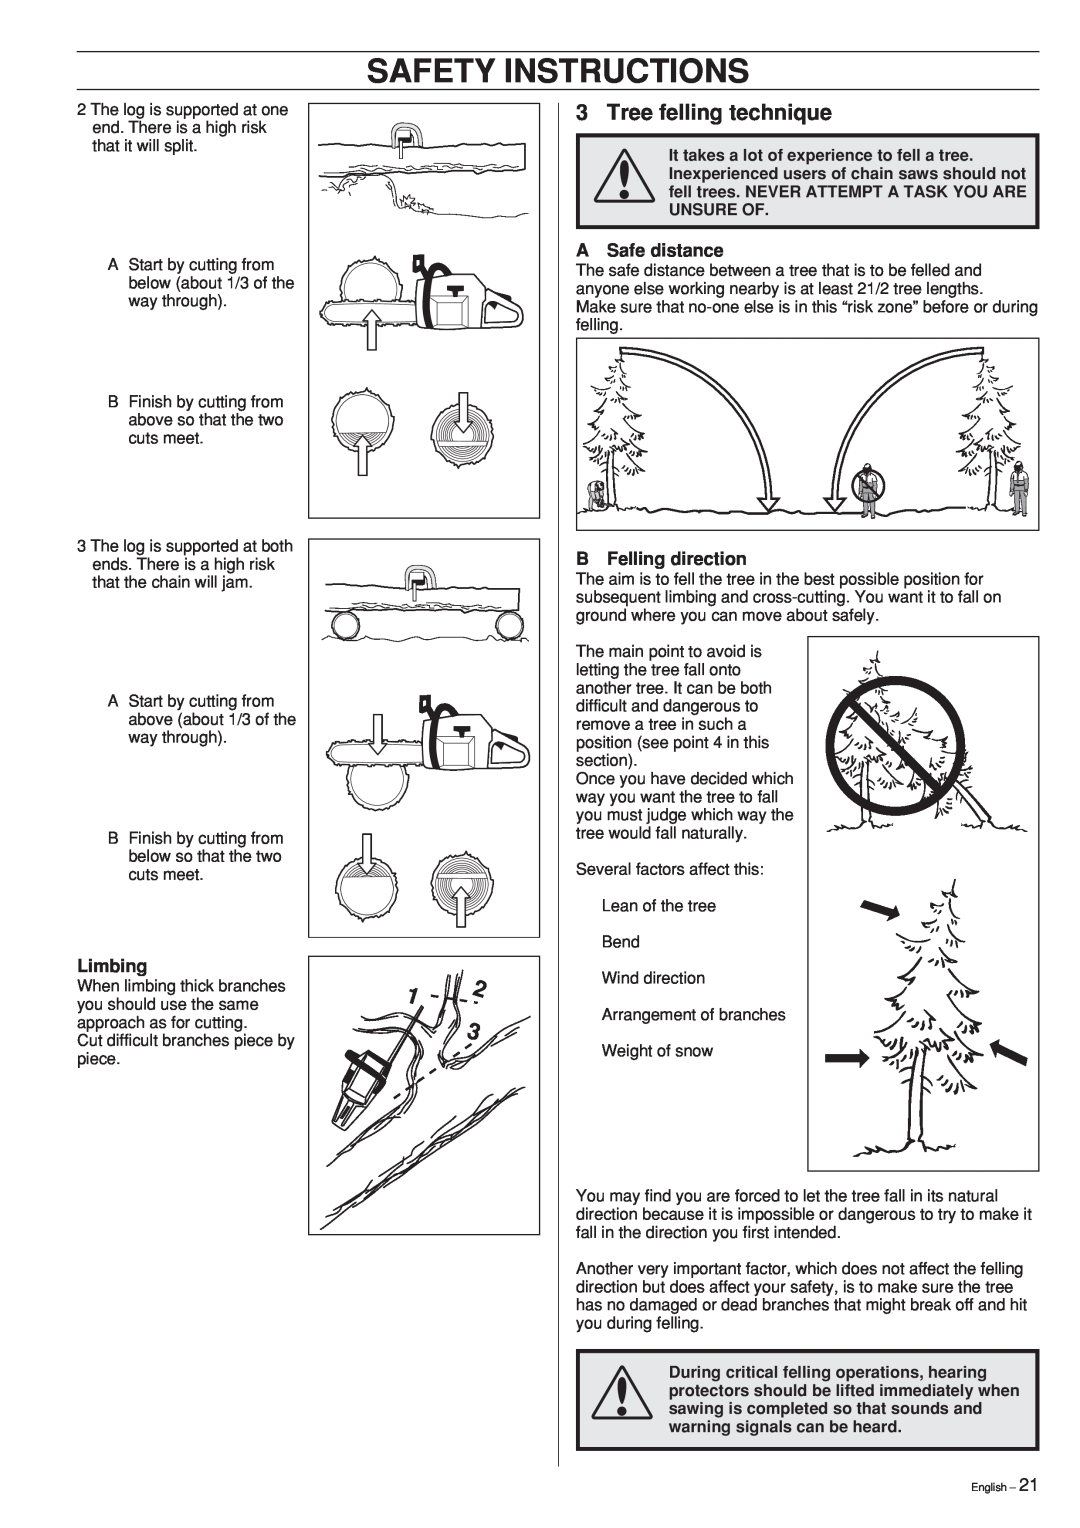 Jonsered cs 2159 manual Tree felling technique, A Safe distance, Limbing, B Felling direction, Safety Instructions 